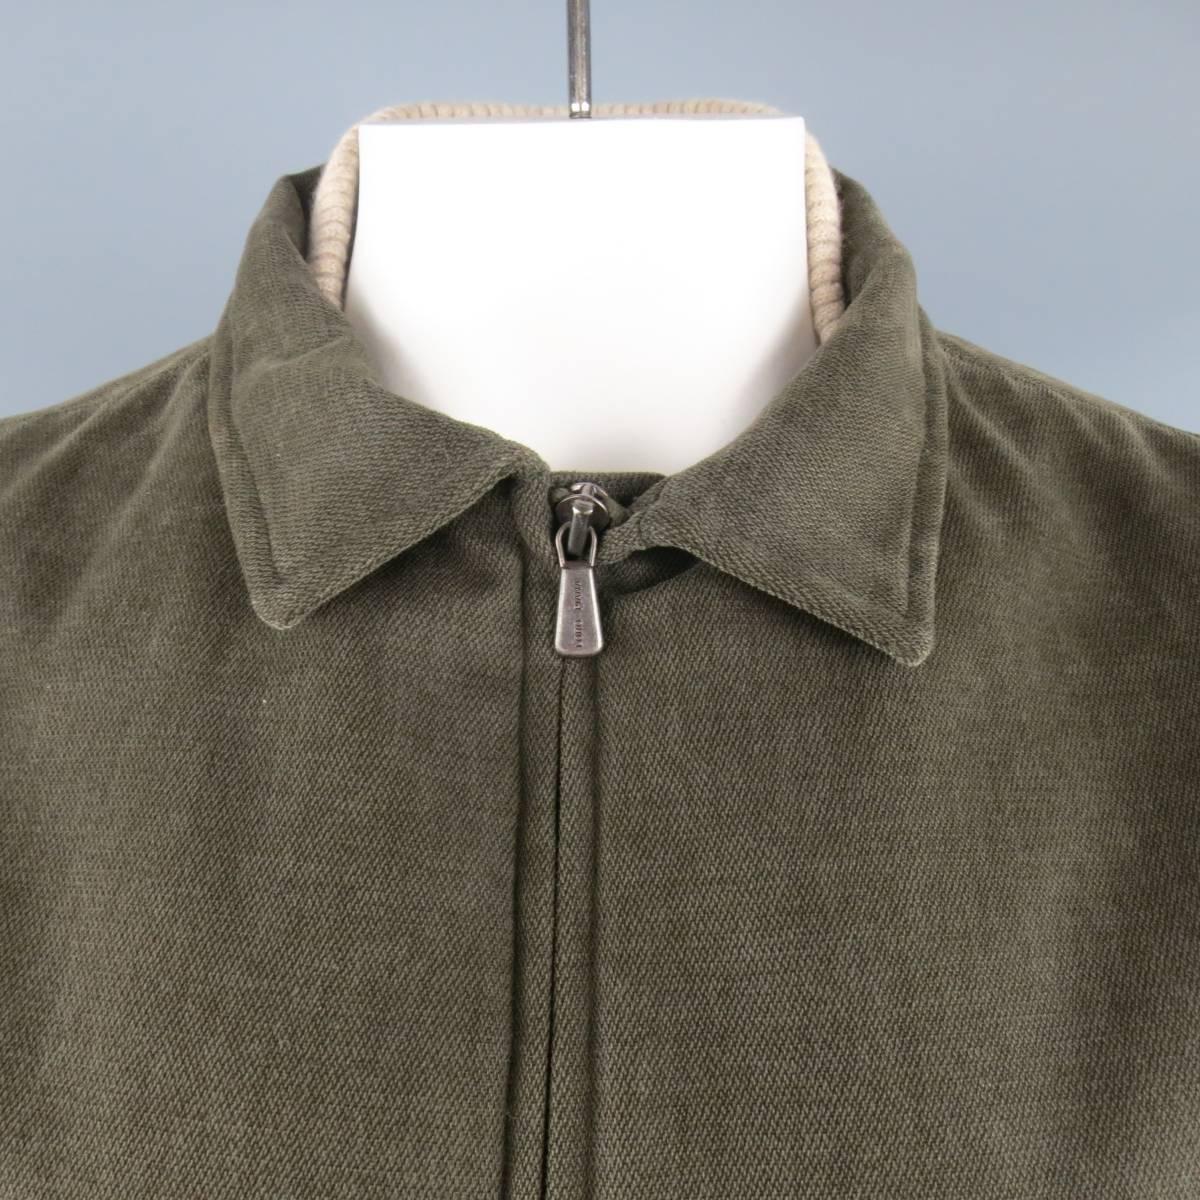 LORO PIANA Storm System vest comes in a soft olive green cotton fabric and features a double zip closure, zip pockets, chest slit pockets, plaid lining, and pointed collar with khaki ribbed knit baseball collar, embroidered logo suede back and